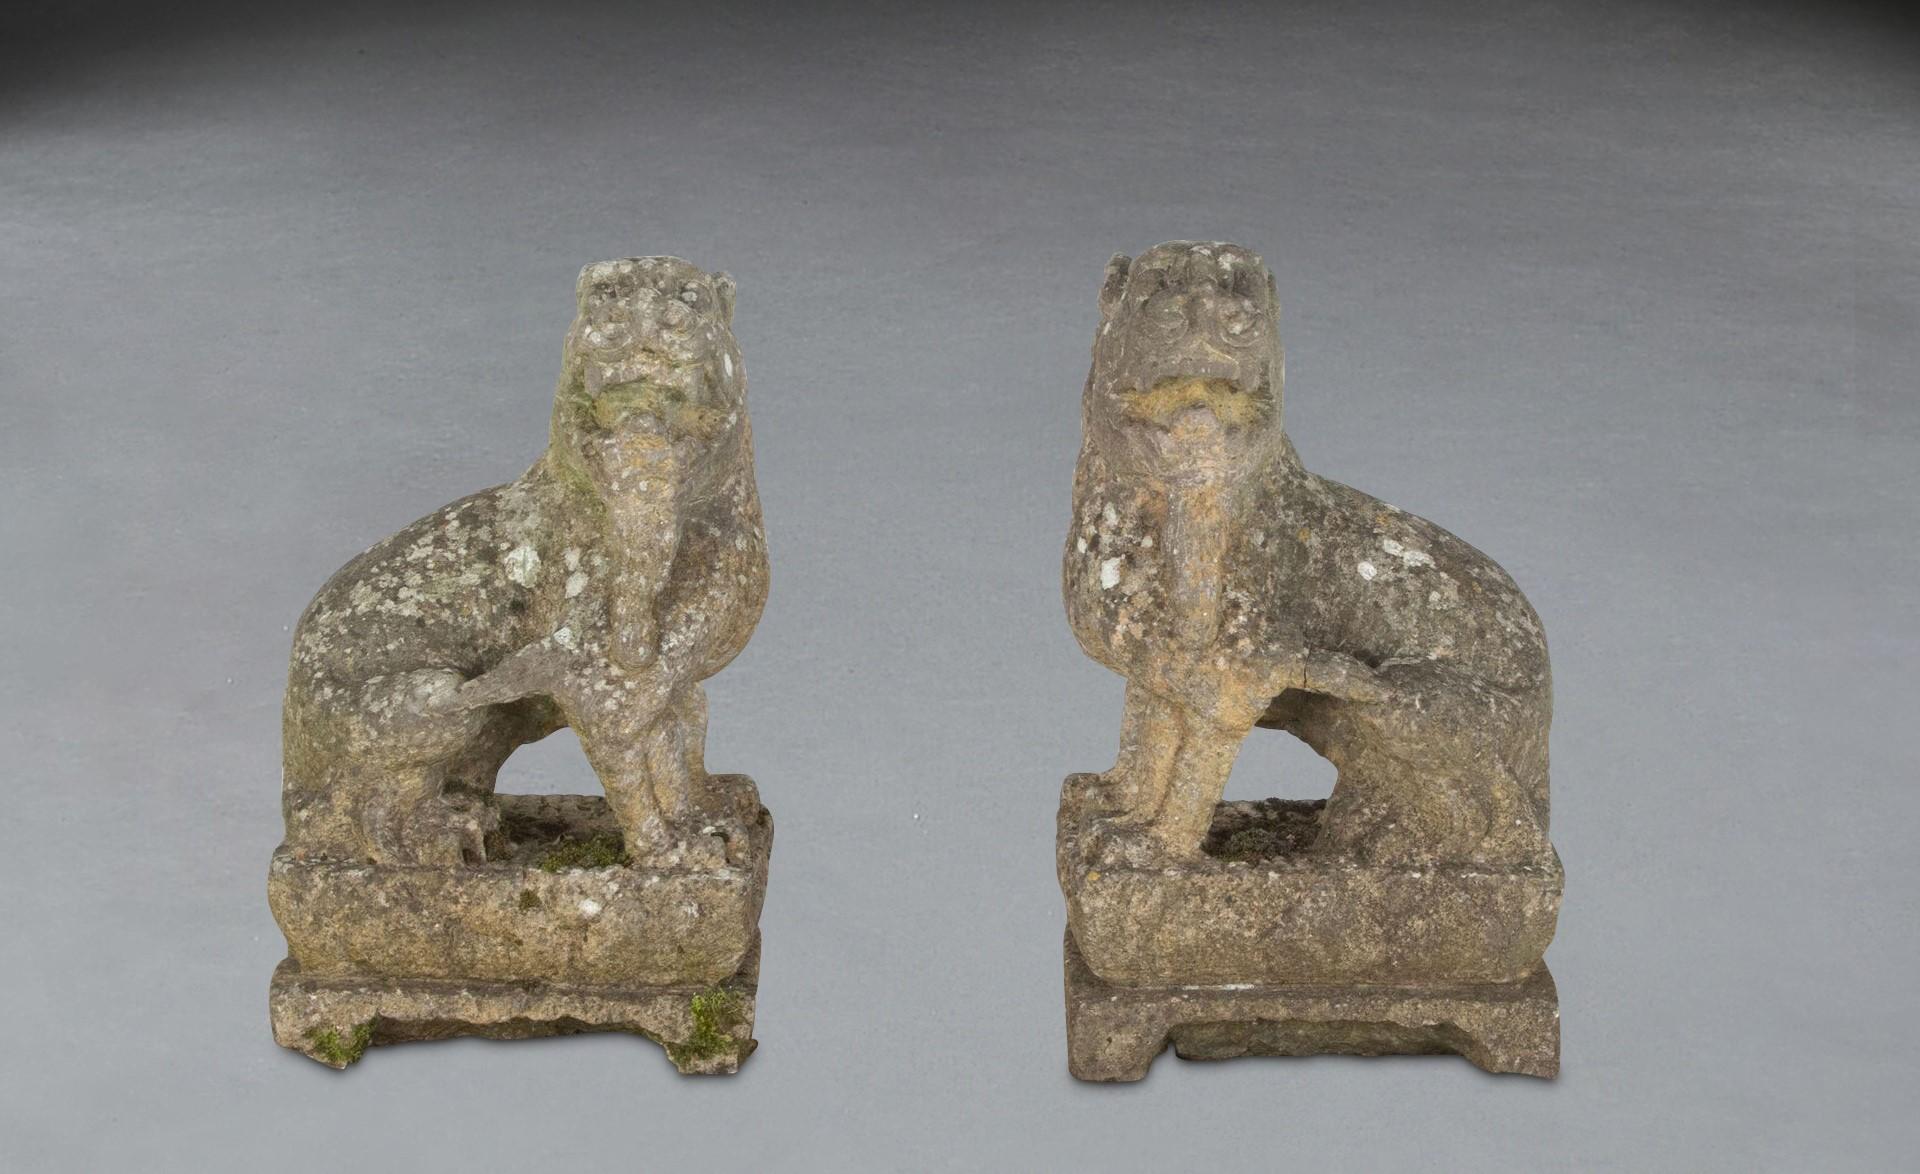 An unusual pair of Chinese carved Stone models of lions, each depicted with opposing heads and seated on lotus bases. In good condition and retaining a nicely weathered surface. Circa 1880.

H: 49 cm (19 5/16